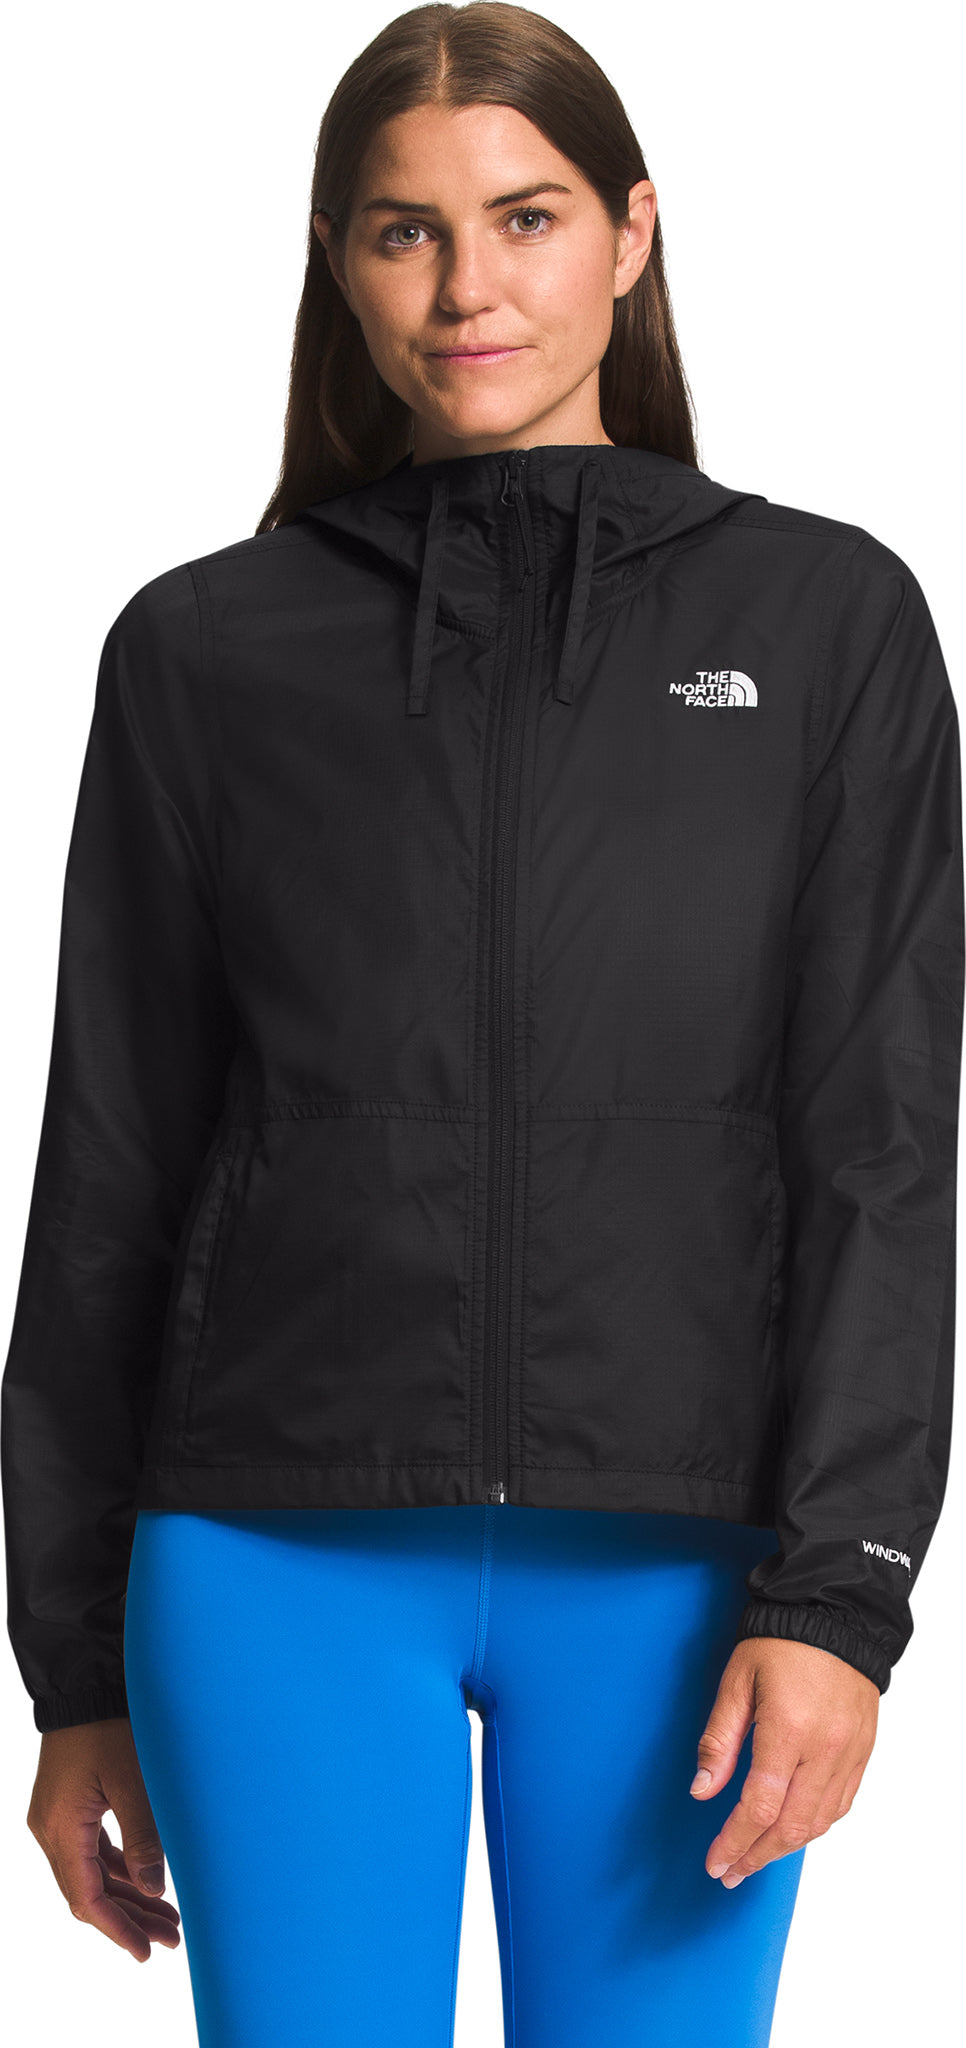 The North Face Cyclone III Jacket - Women's | Altitude Sports